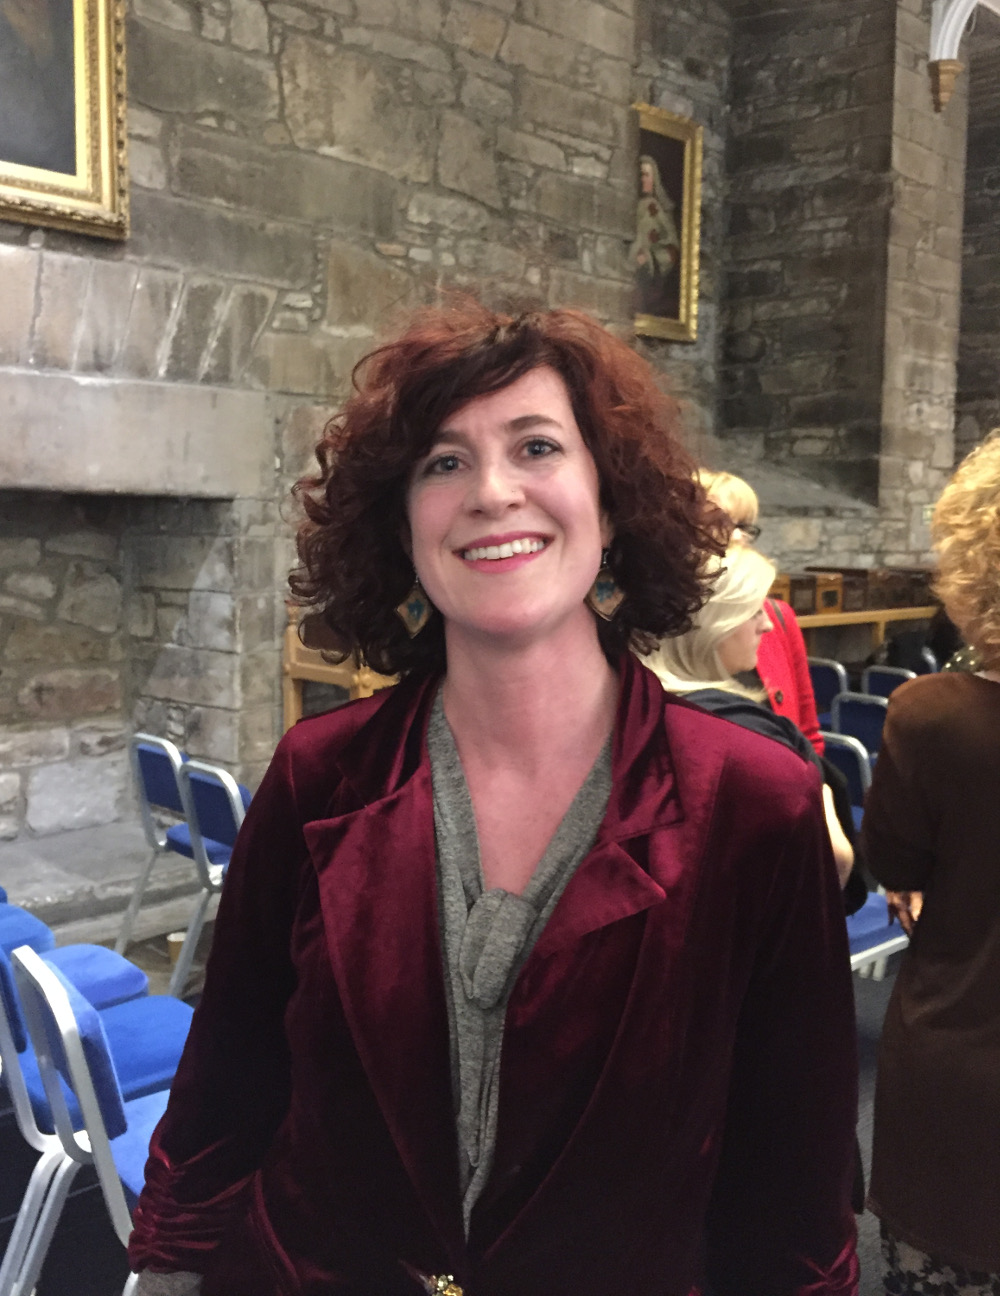 #InPictures: Cork researcher takes part in 'therapeutic justice' event in Edinburgh